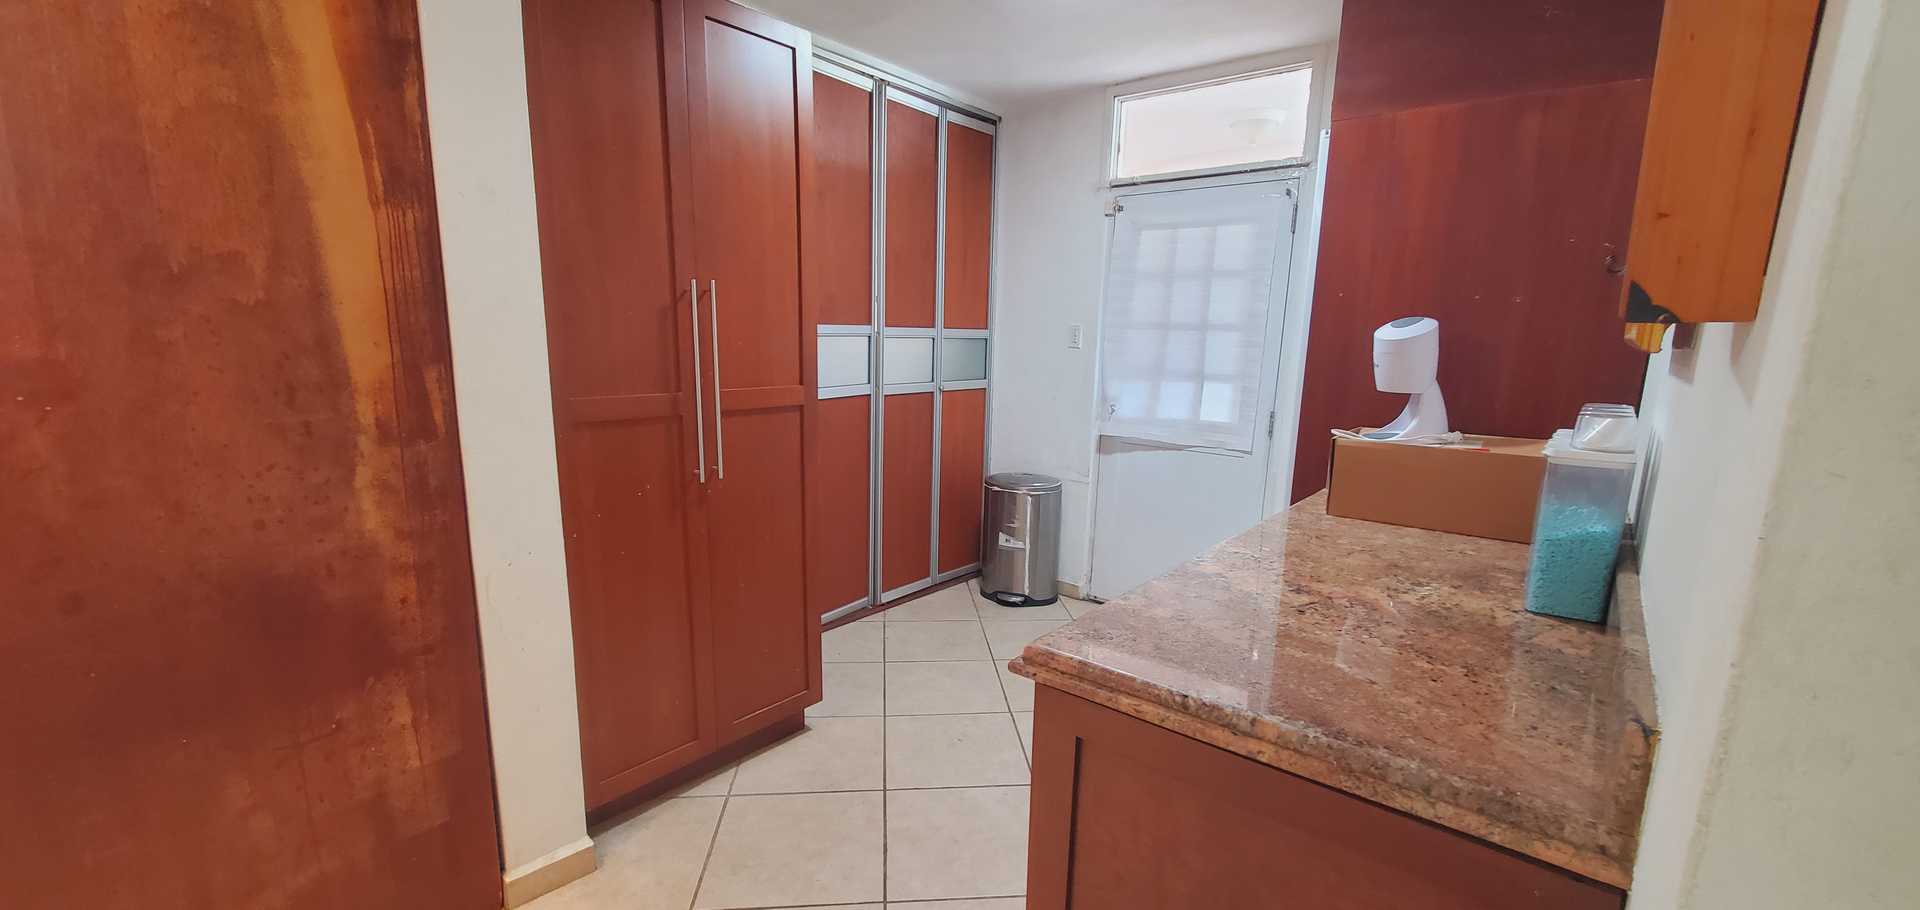 House in Guaynabo, Calle Febe 12537094